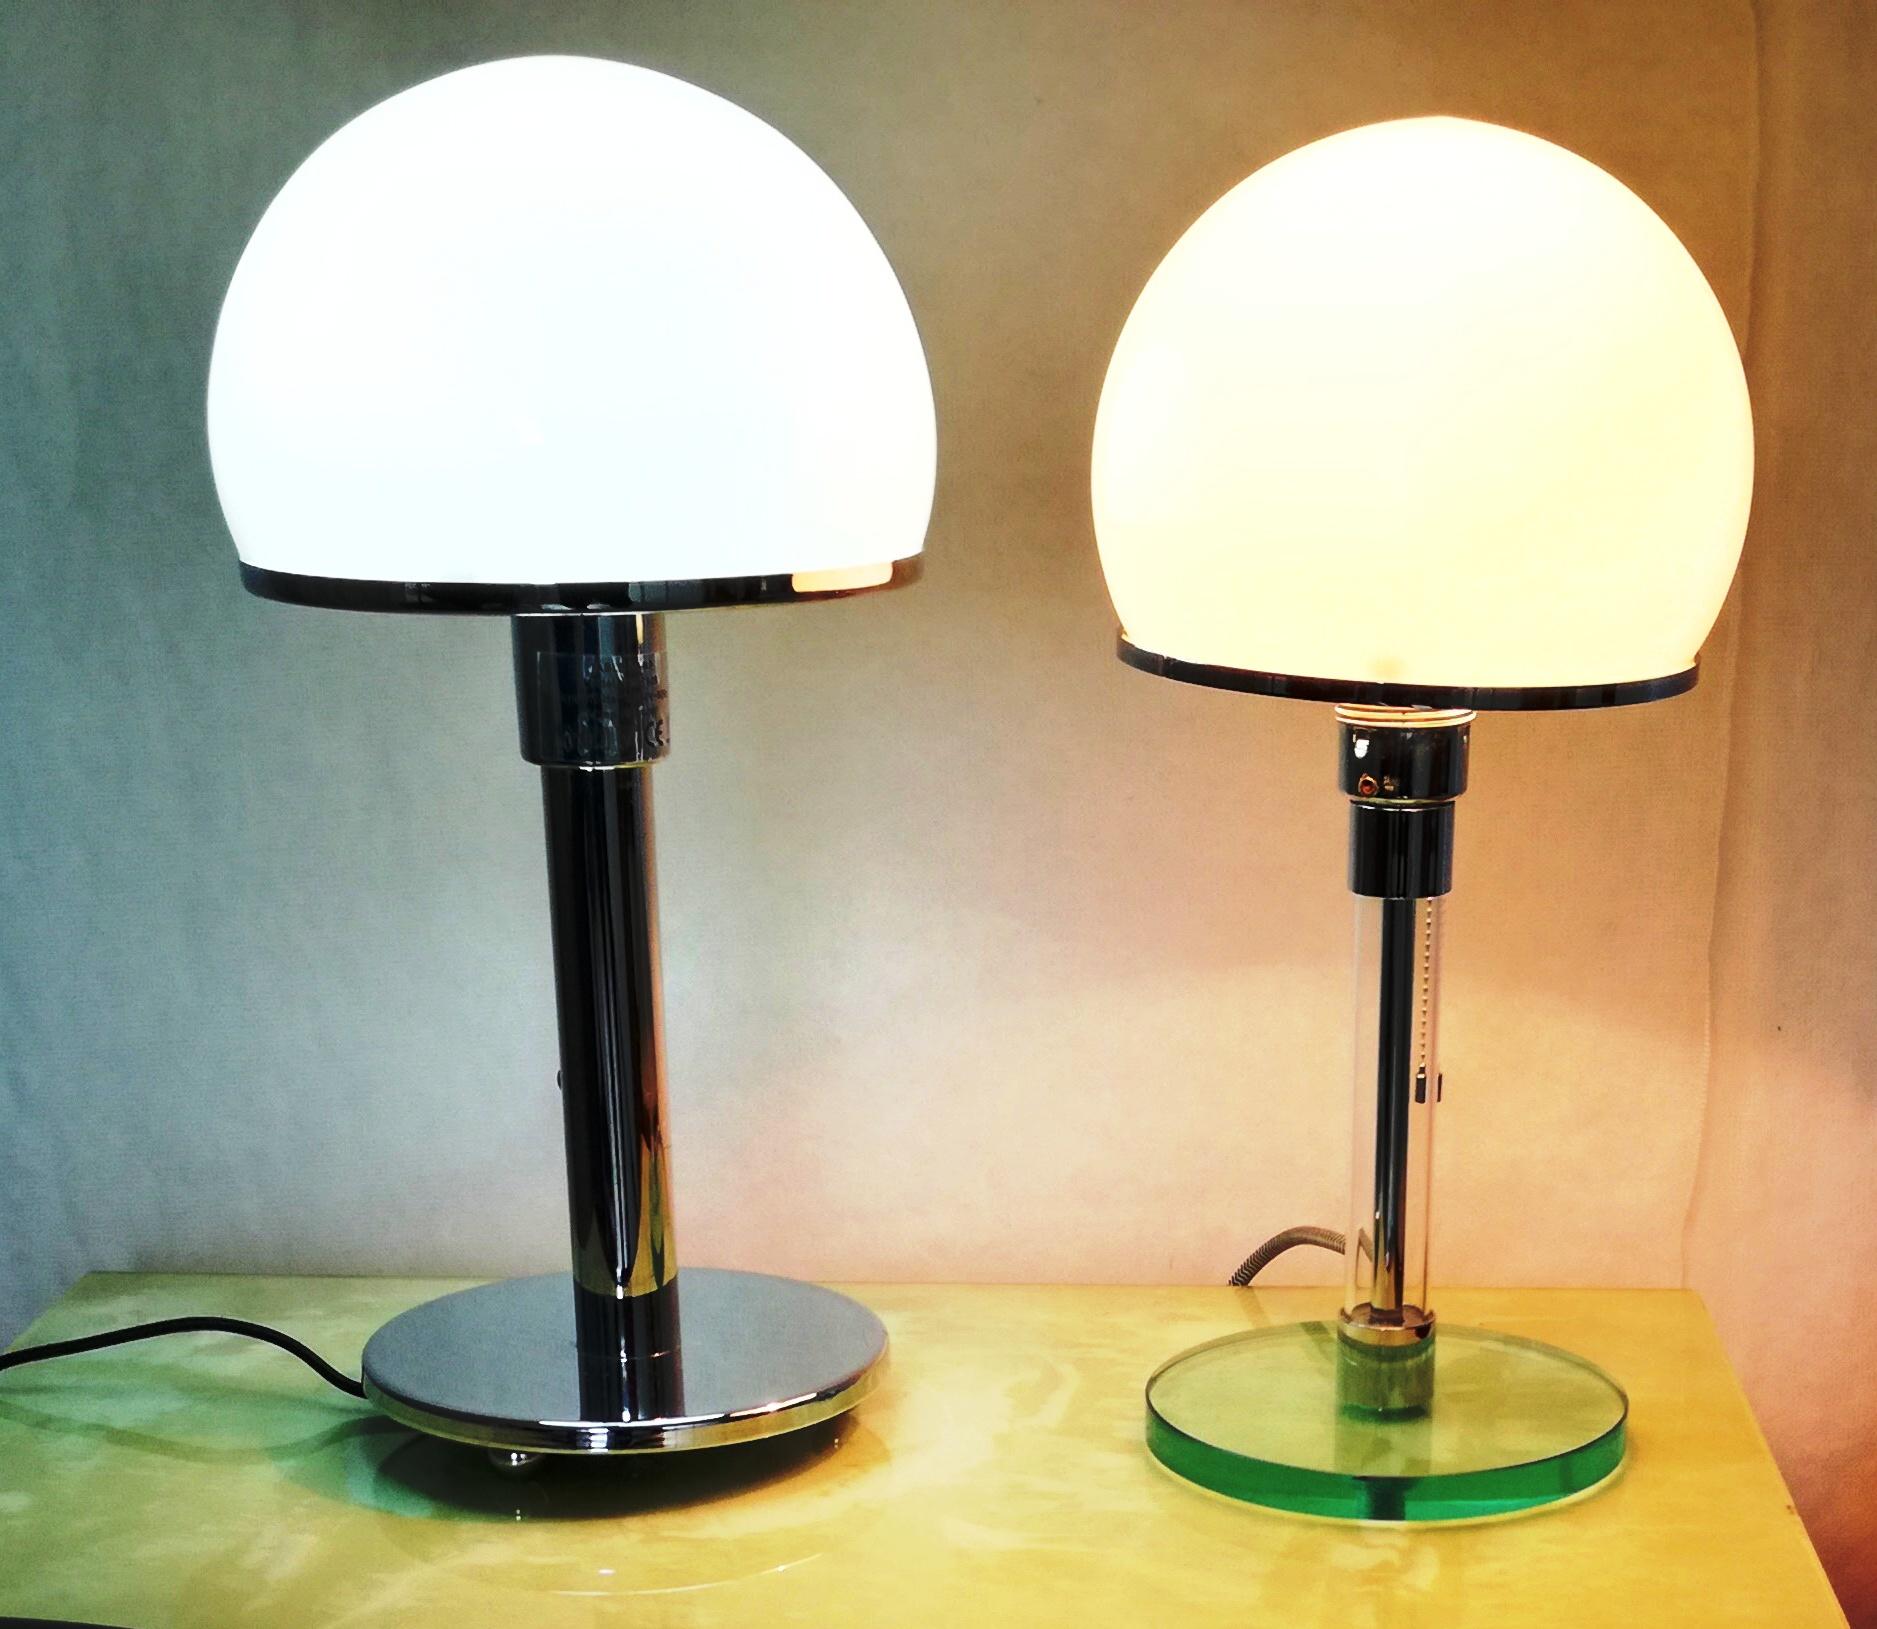 pair of bedside lamps, Bauhaus style. 2 different types. 1990s reissue. one lamp with clear glass stem and base. one lamp with chrome metal stem and base. A classic Bauhaus style by Wilhelm Wagenfeld for Egoluce. e27 bulb socket, pull switch with